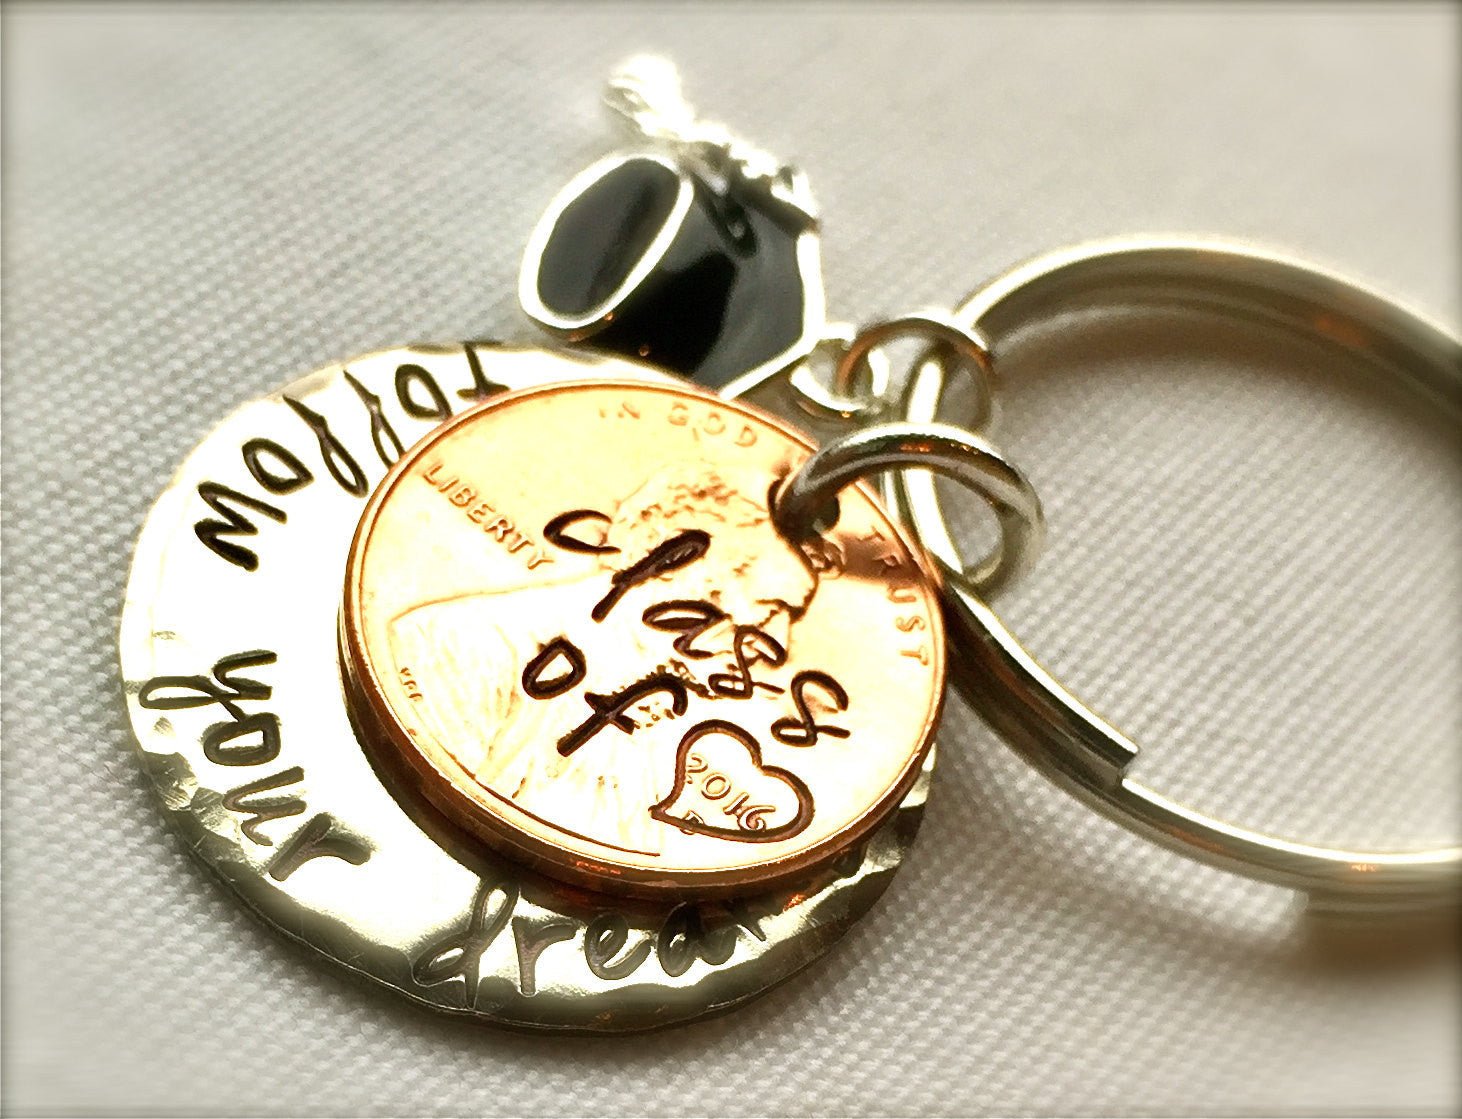 Graduation Gifts, Personalized Penny Keychain, Grad Gifts, Penny Keychains, Gradaution 2016, Follow Your Dreams, Do What You Love - Natashaaloha, jewelry, bracelets, necklace, keychains, fishing lures, gifts for men, charms, personalized, 